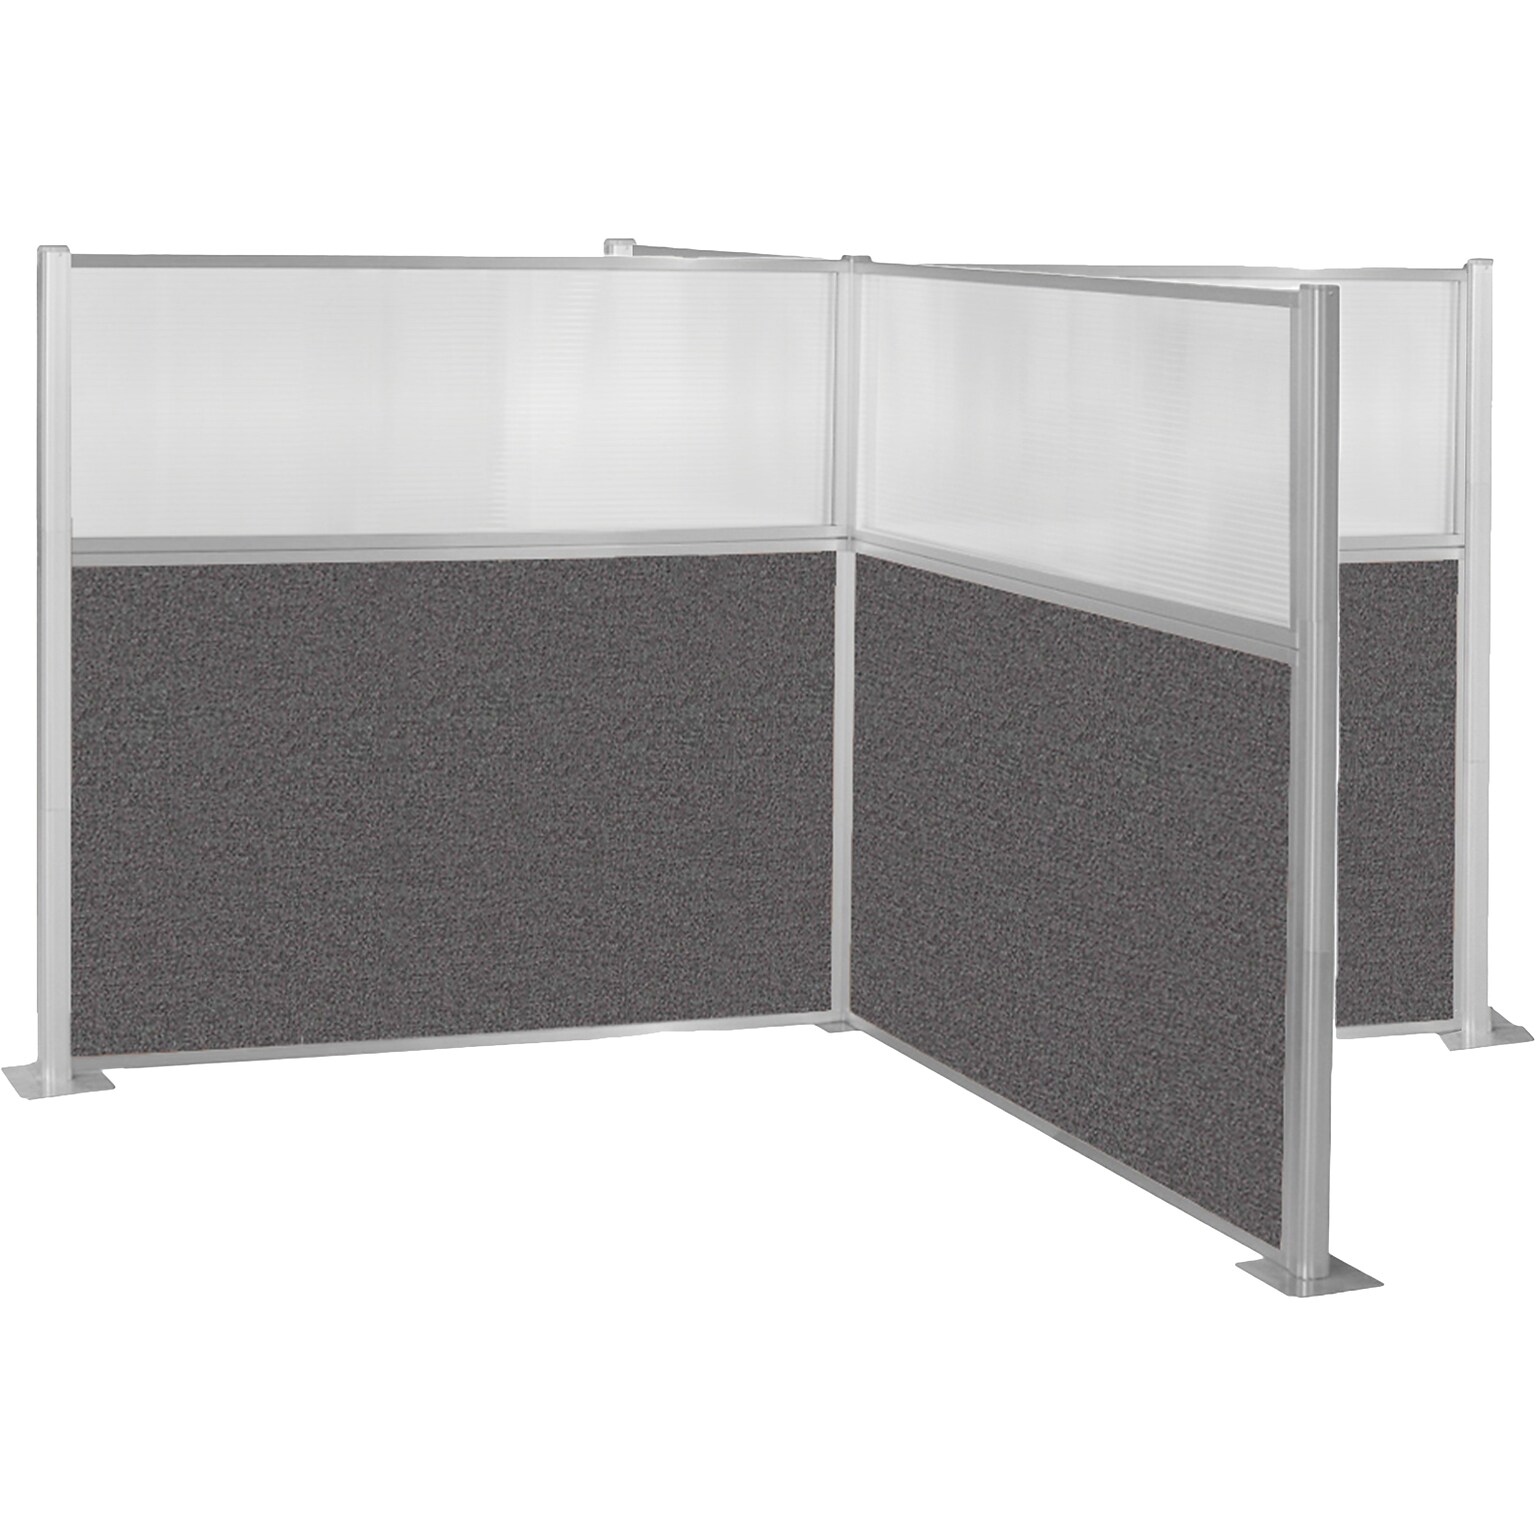 Versare Freestanding Hush Cubicle Kit with Windows, 6H x 12W, Charcoal Gray/Clear Fabric/Polycarbonate (1851602)